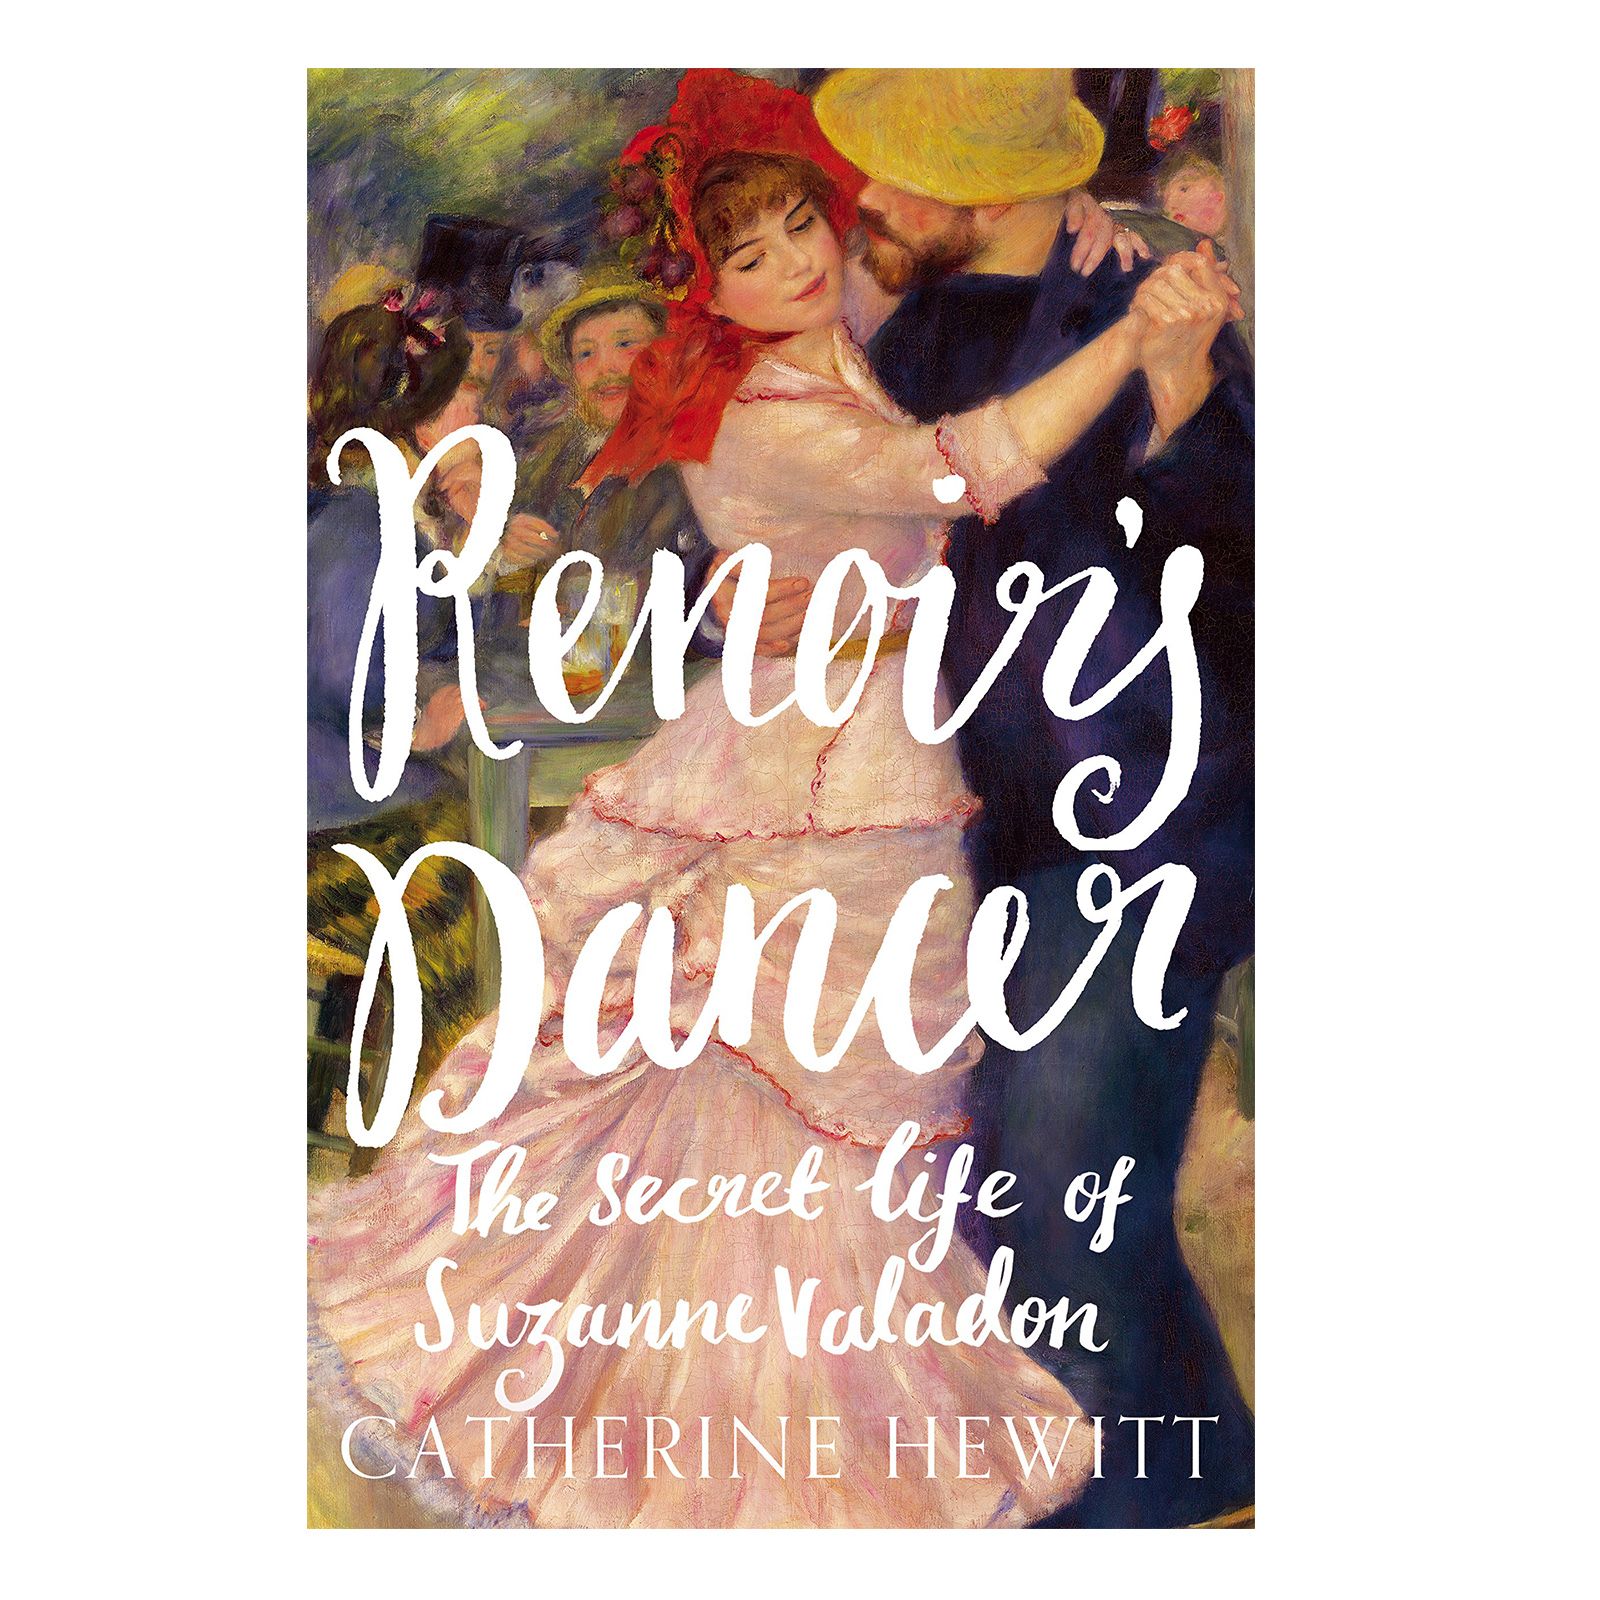 Books # 24 and 25 in 2018: “Renoir’s Dancer” by Catherine Hewitt and “Picasso and the Painting that Shocked the World” by Miles J. Unger